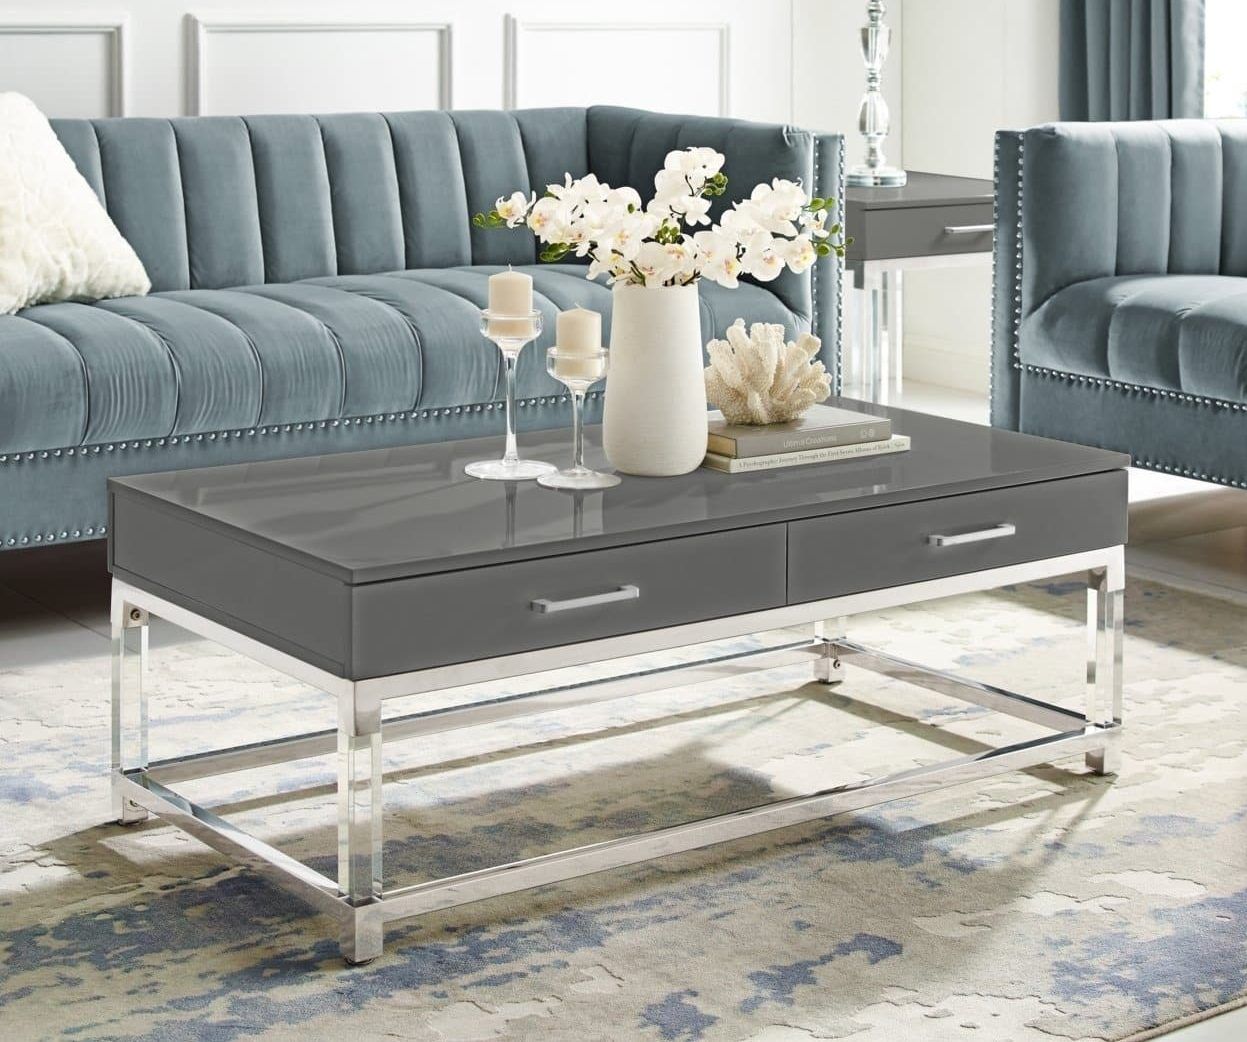 21 Lucite Coffee Tables To Liven Your Living Room – Acrylic & See Through With Regard To Acrylic Coffee Tables (View 20 of 20)